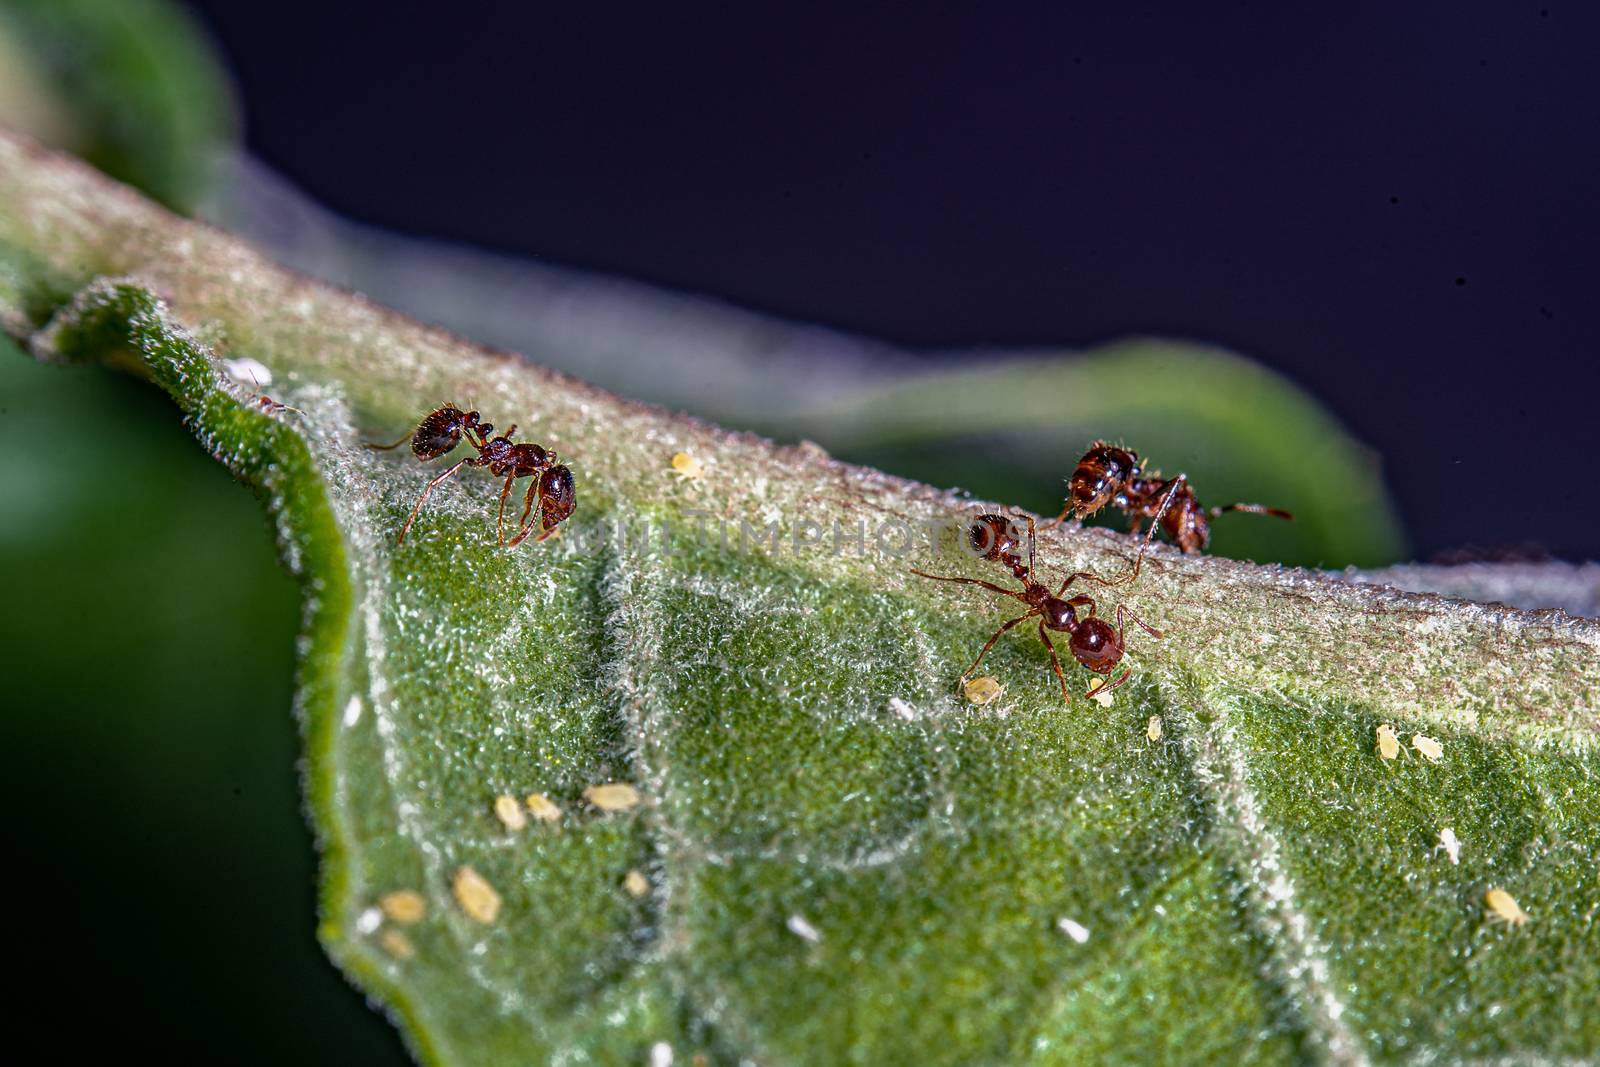 Three ants and some aphids on a green leave.